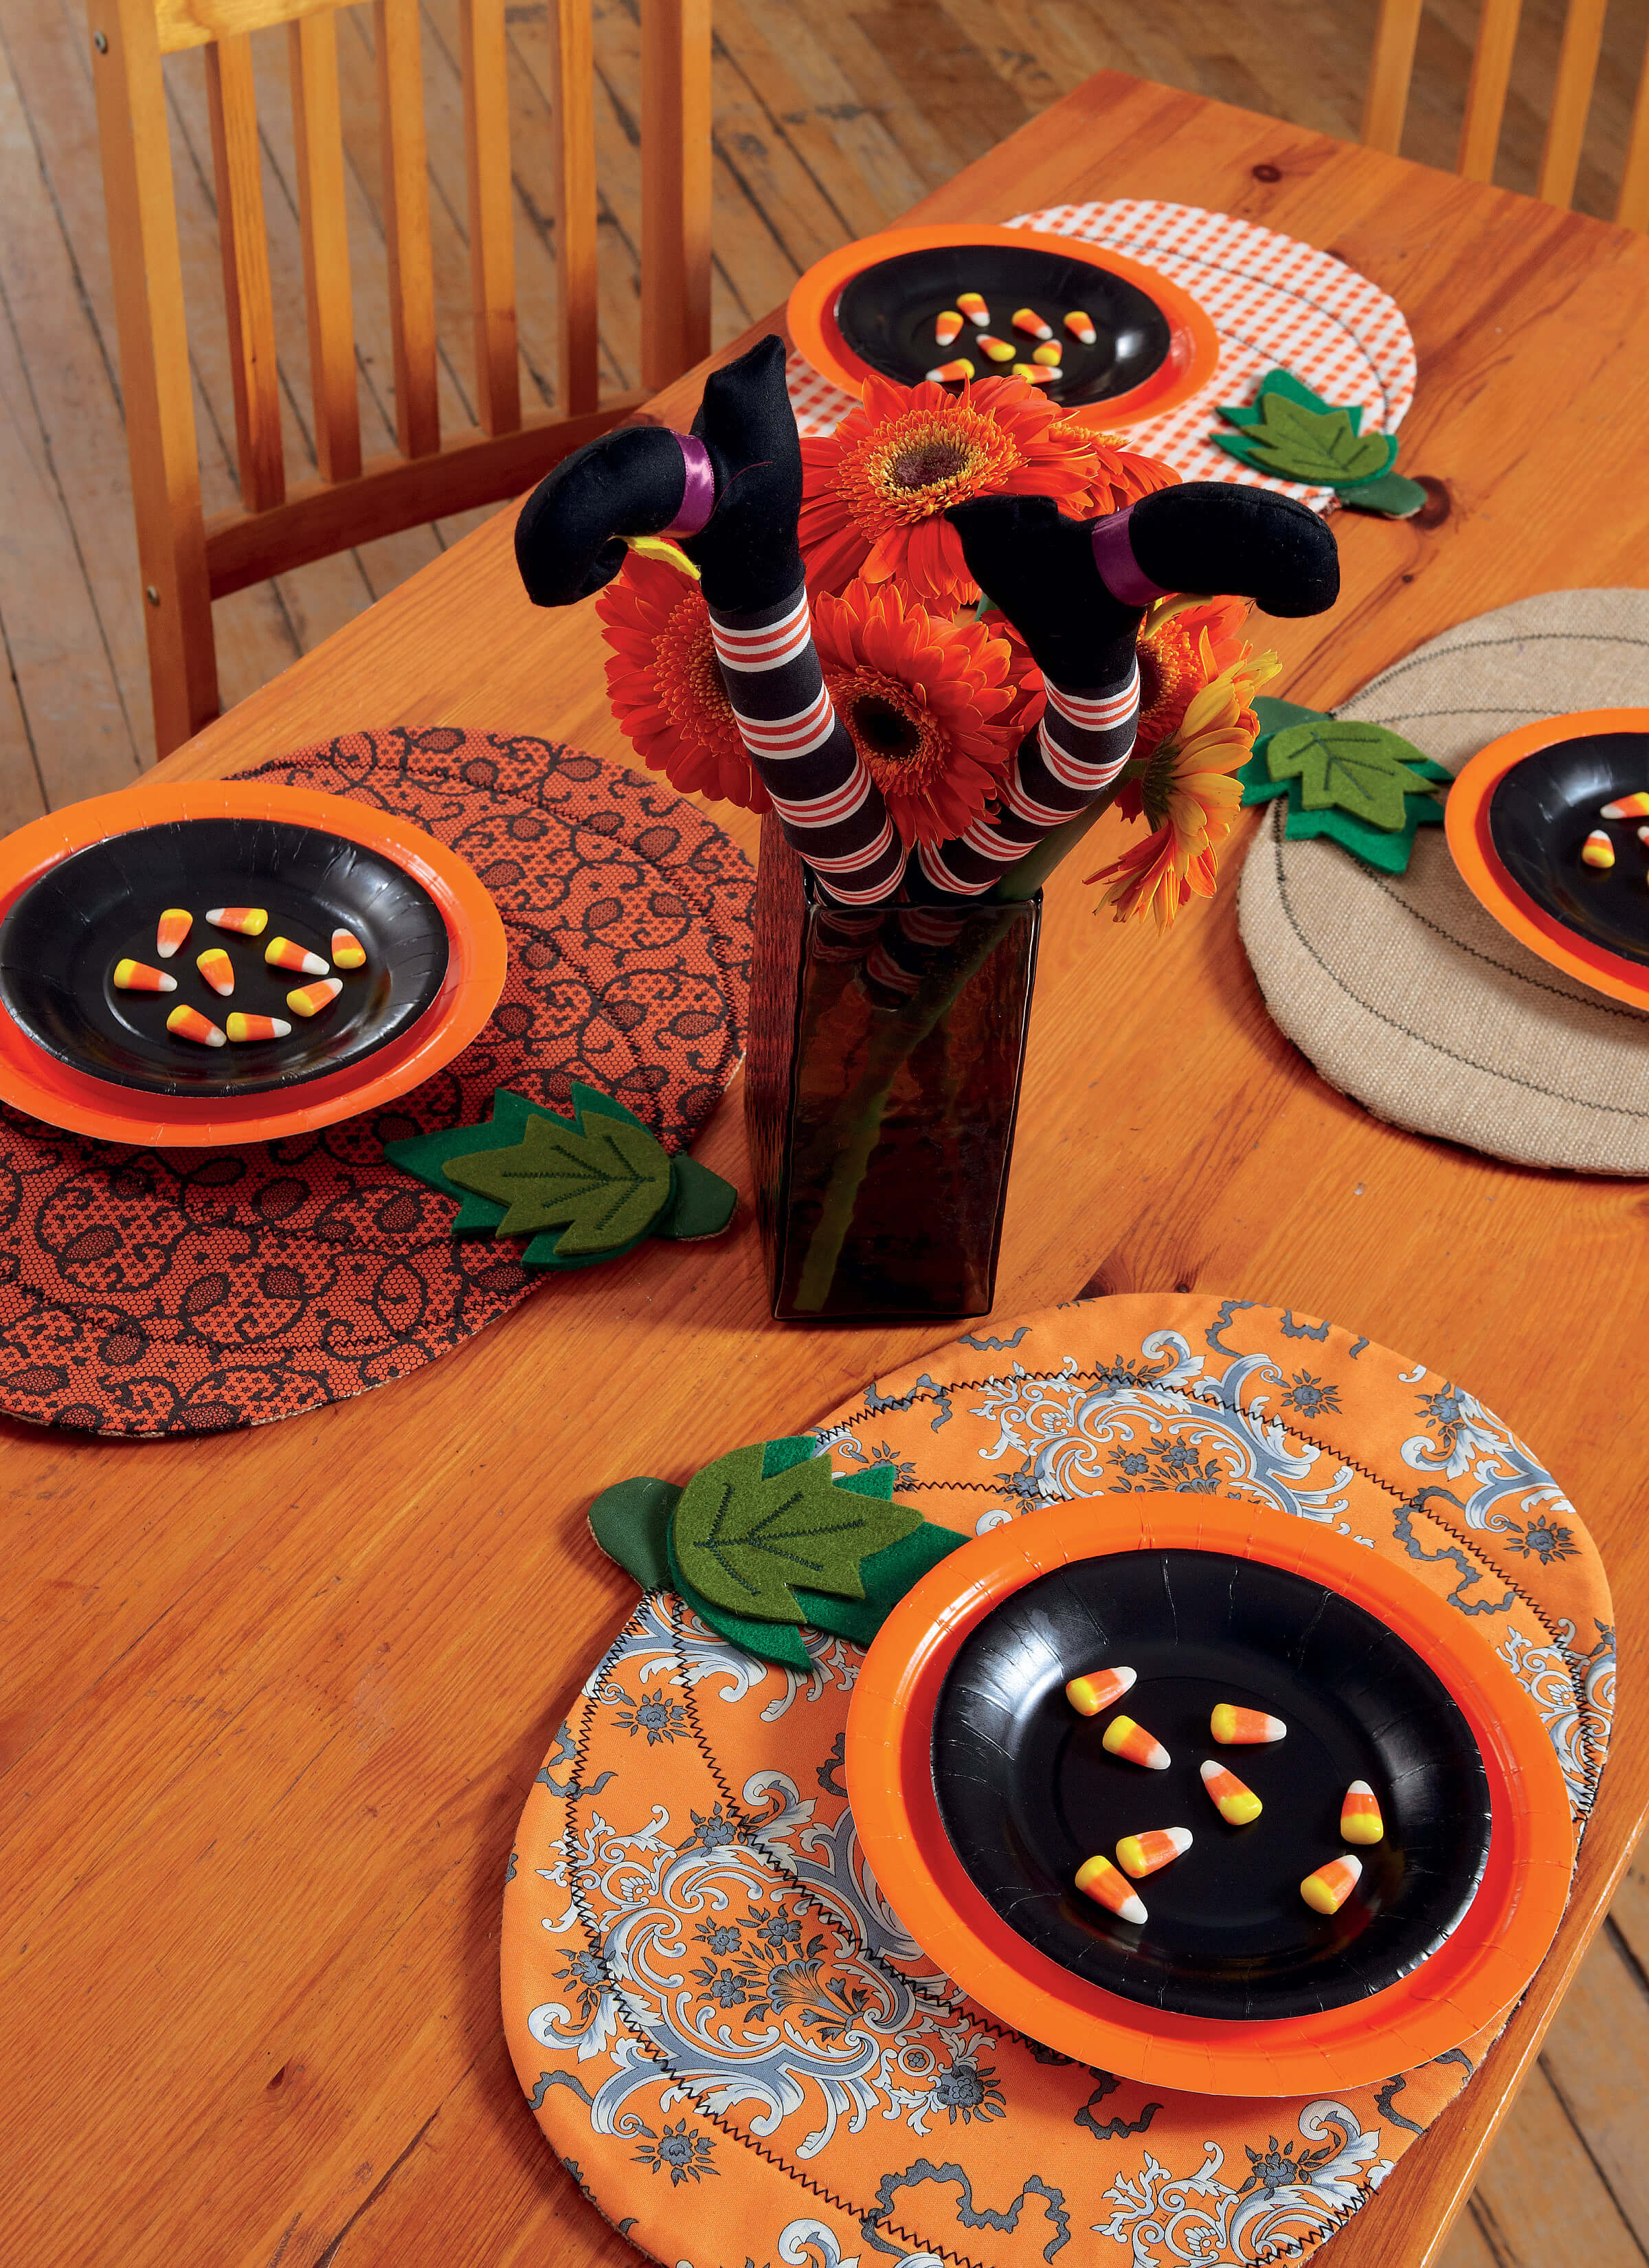 McCall's Sewing Pattern Pumpkin Placemats/Table Runner, Witch Hat/Legs, and Wreaths